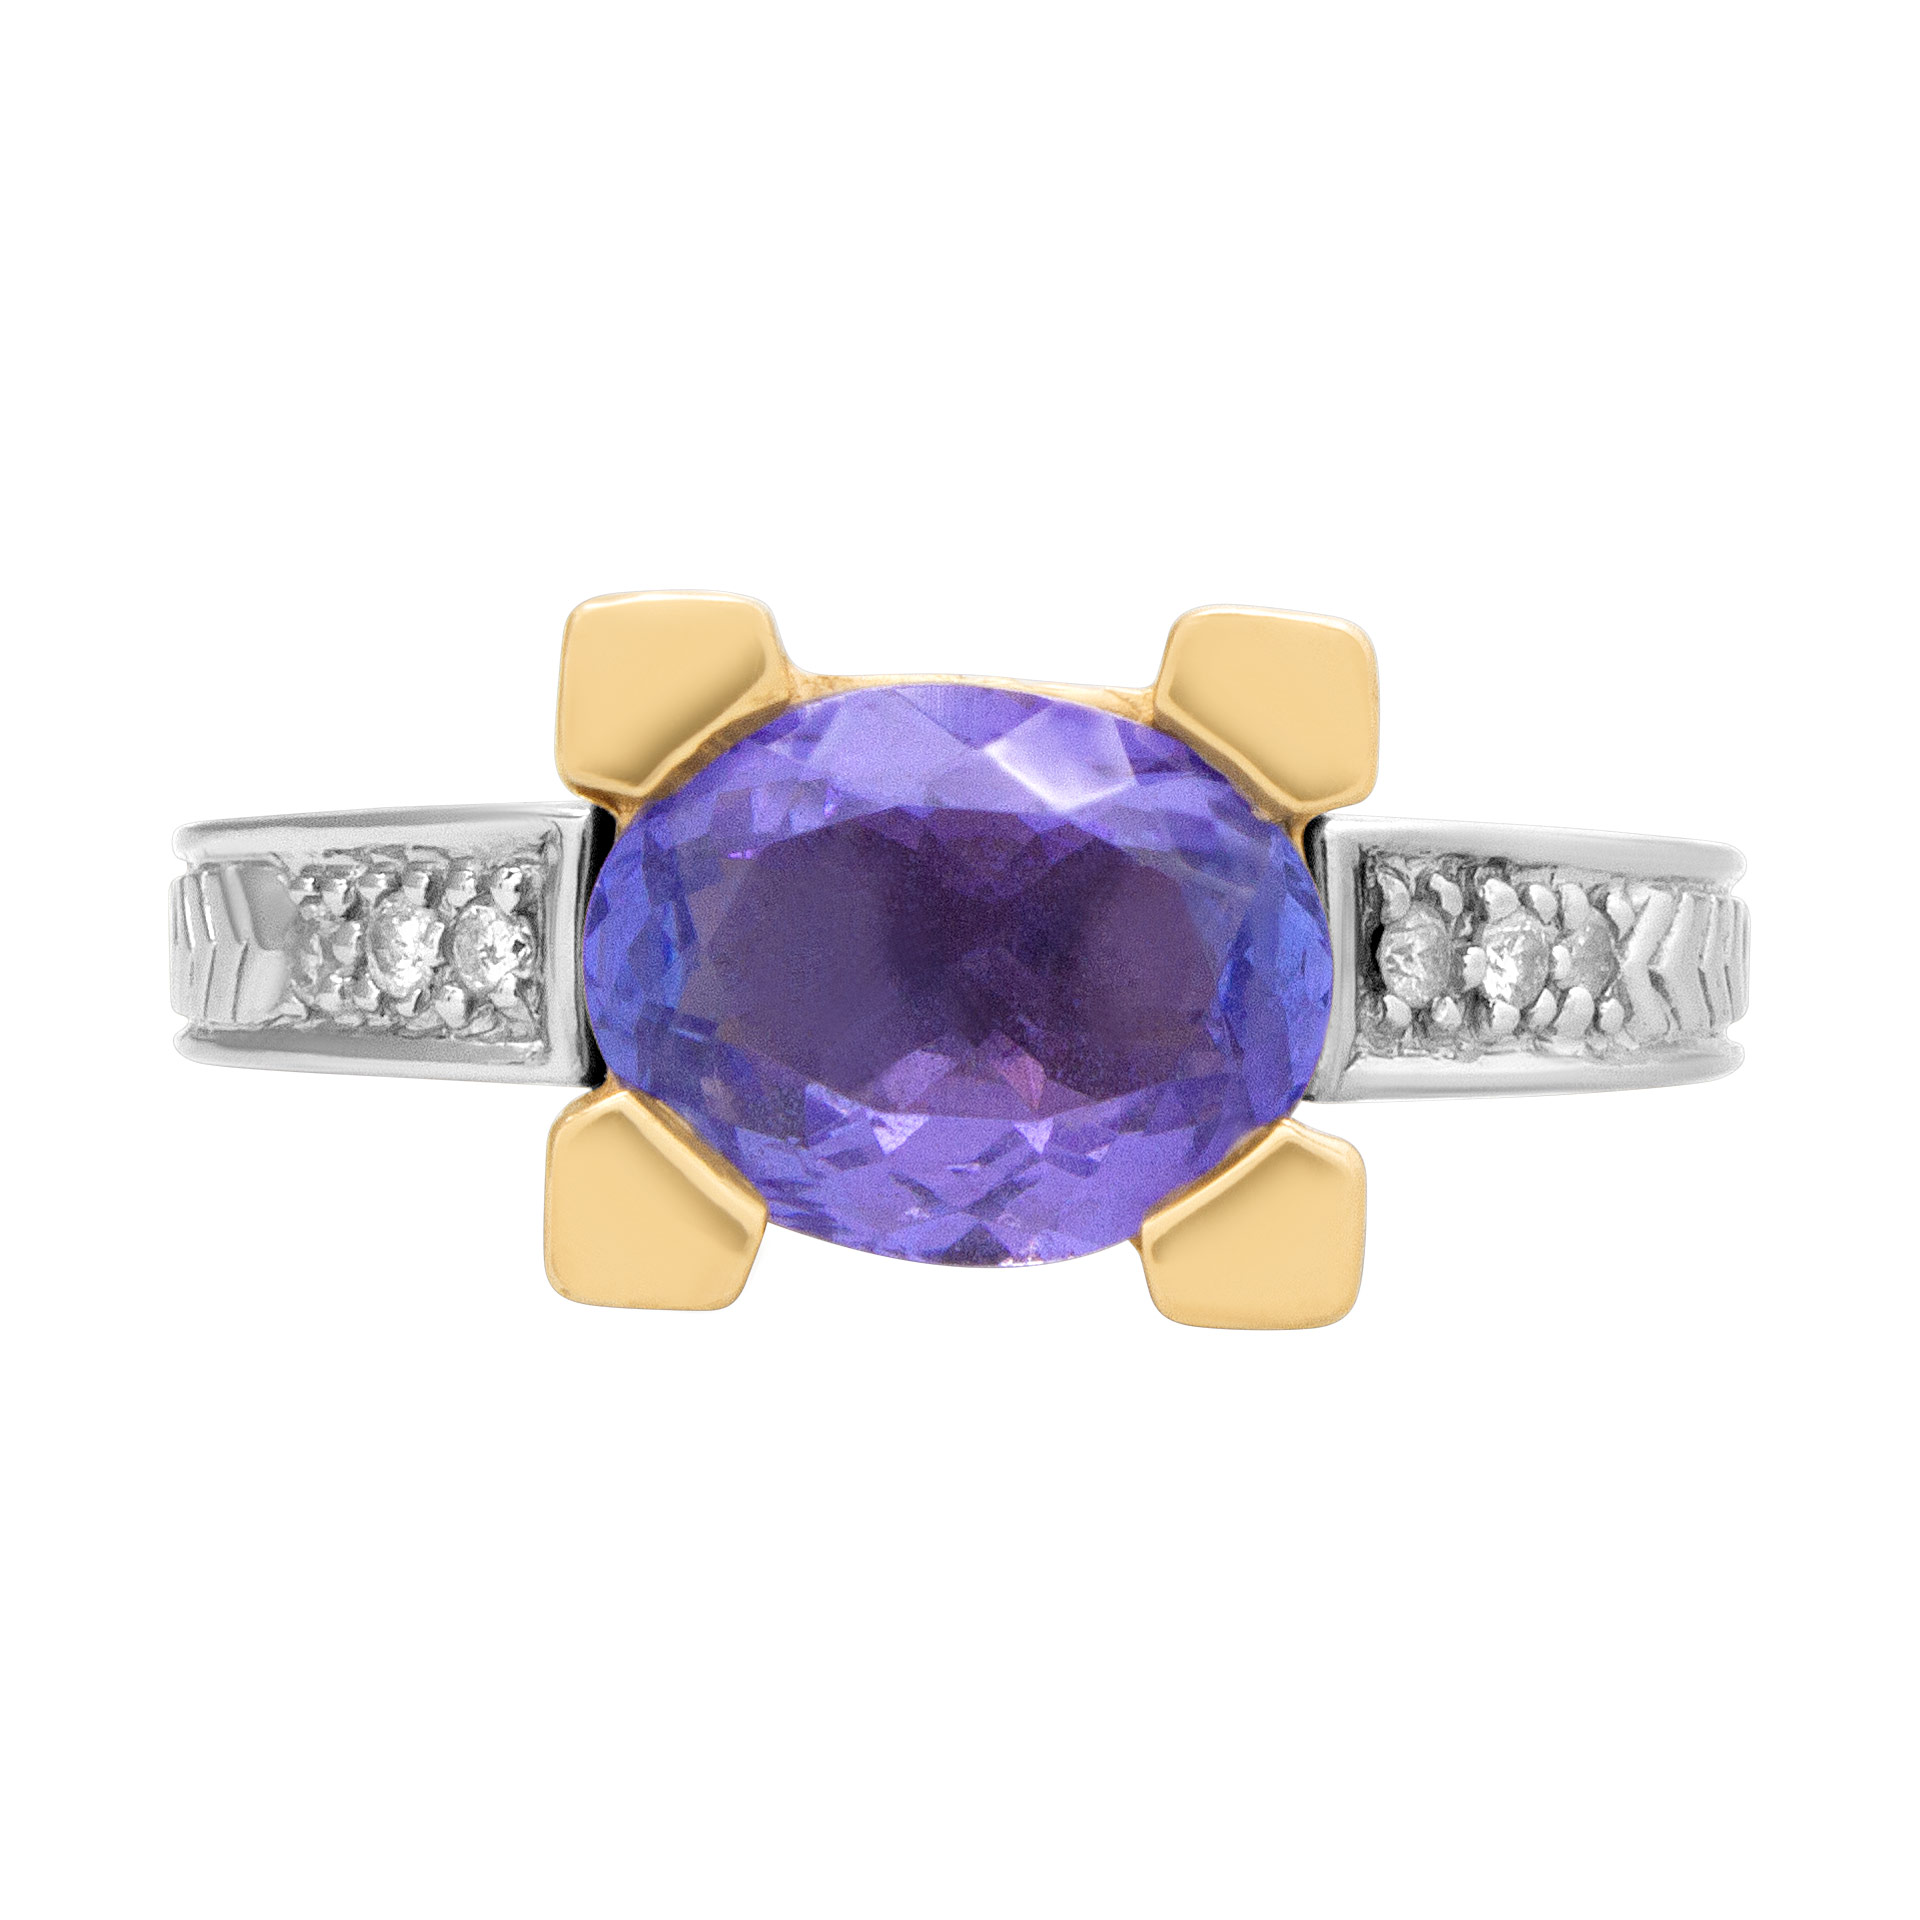 Tanzanite ring (1.50 cts) with diamond accents in 14k white and yellow gold